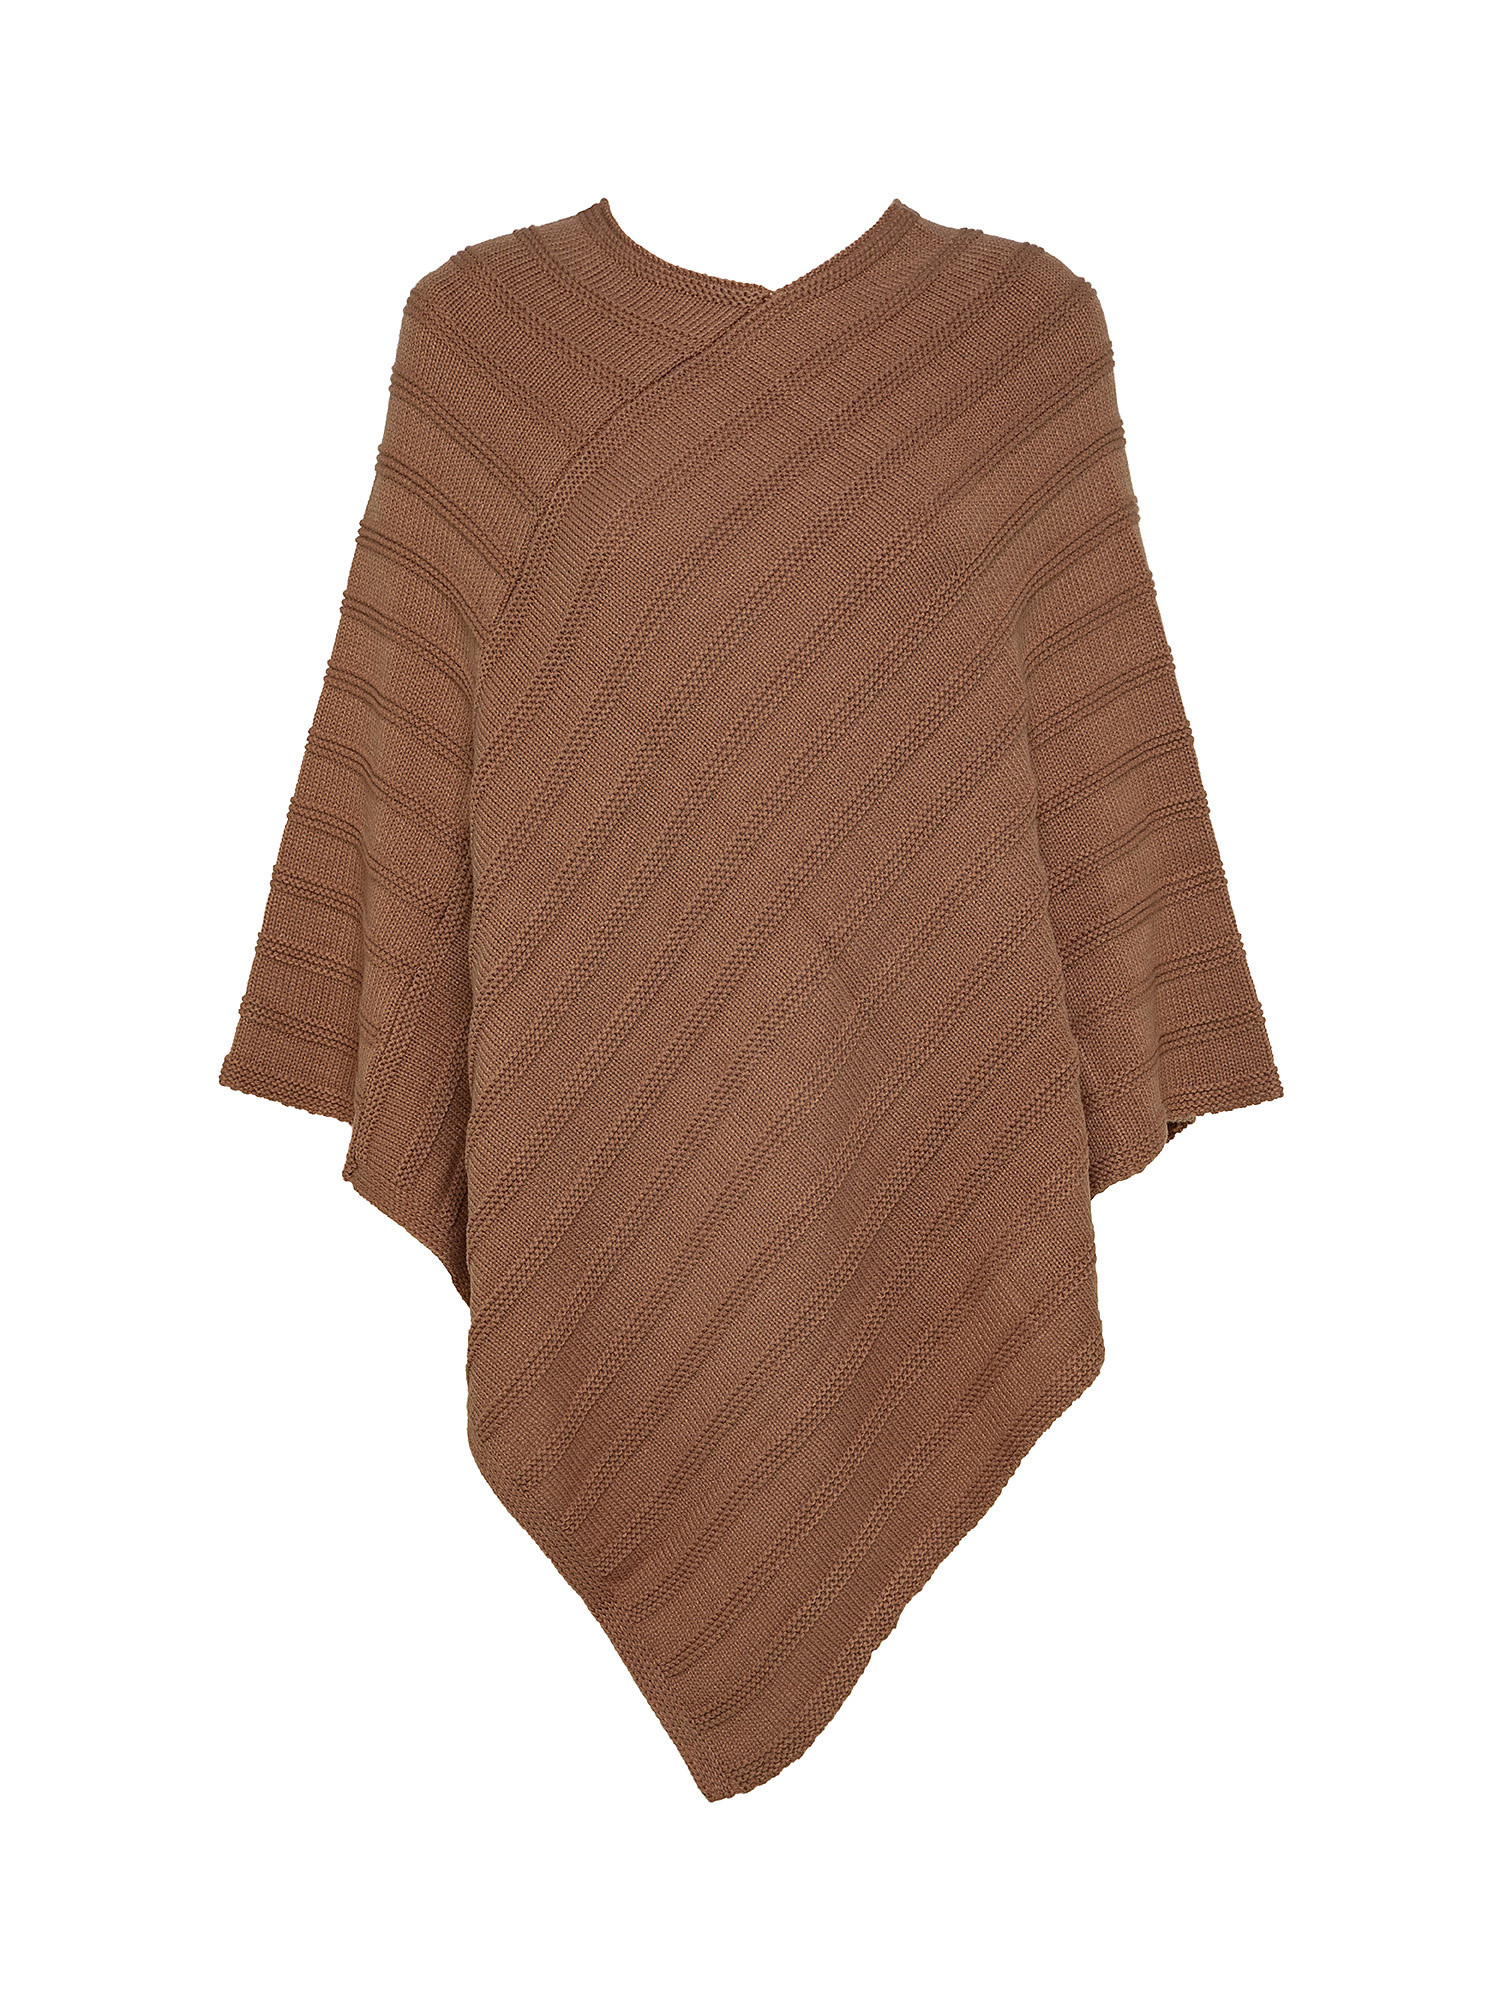 Poncho a righe diagonali, Beige, large image number 0